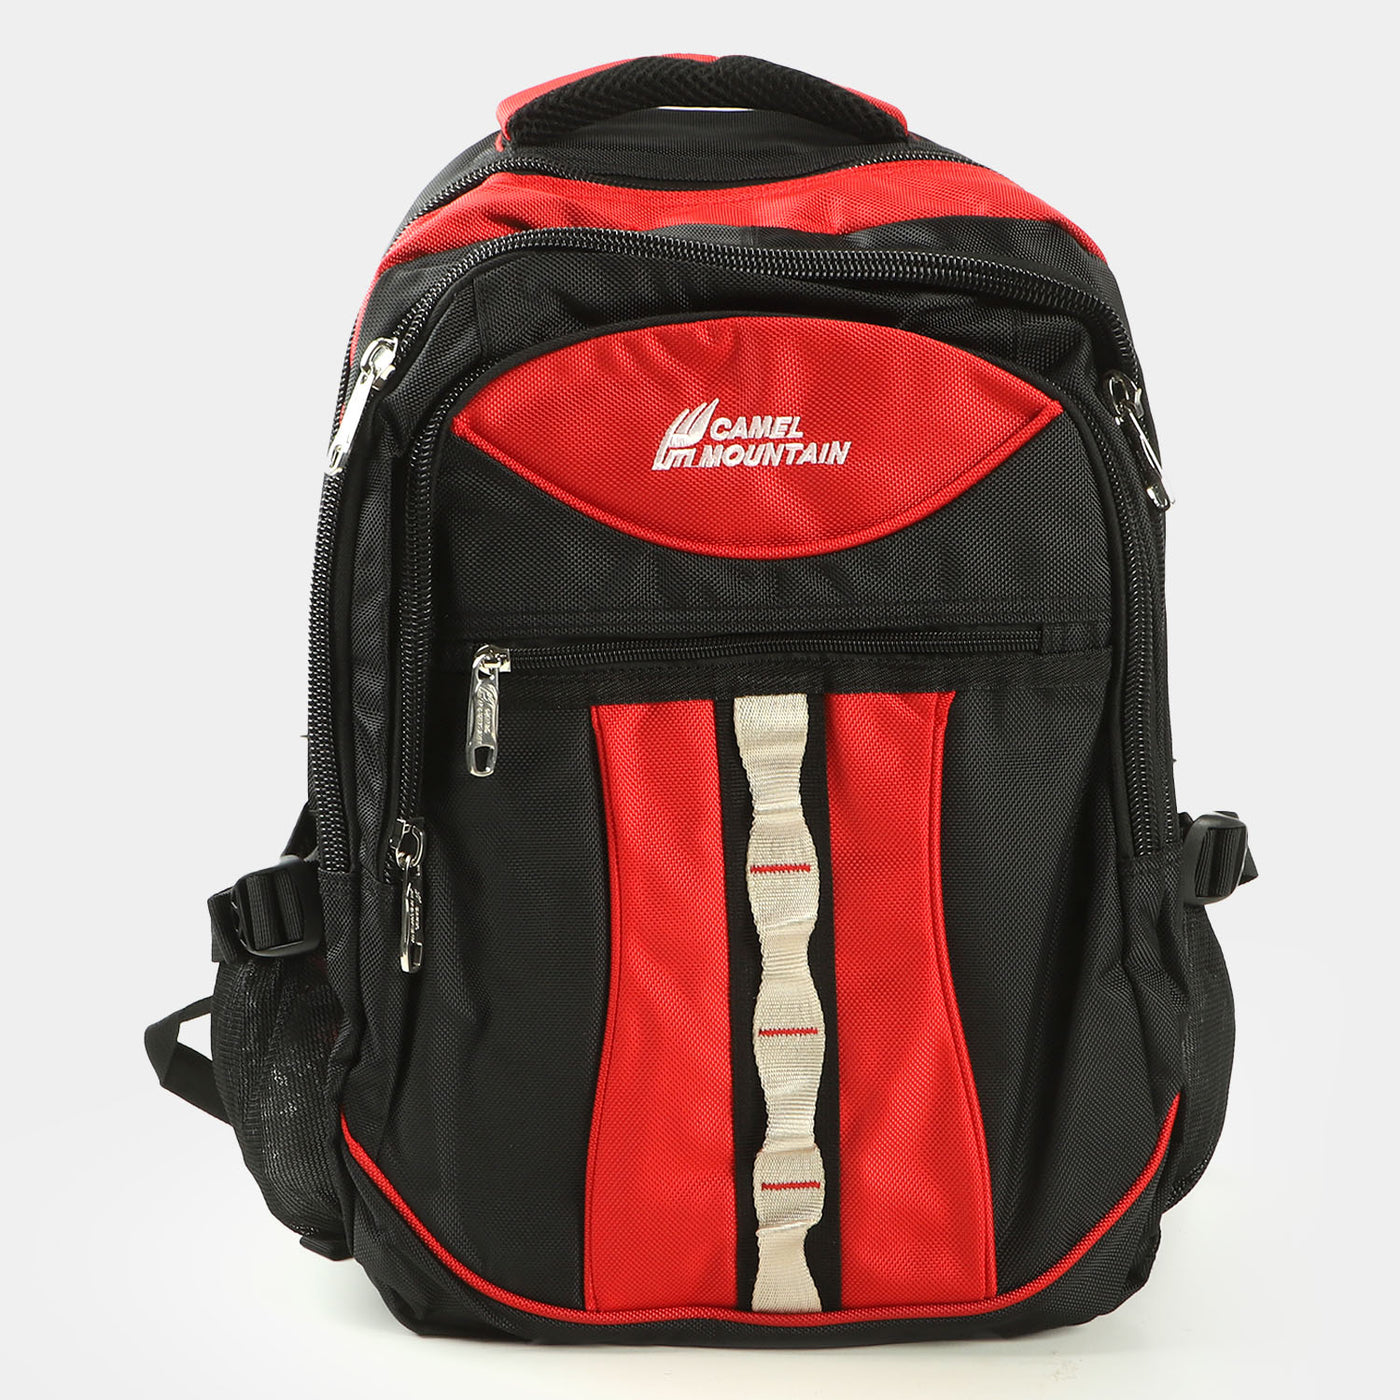 Camel Mountain - Boutique INTELLIGENT Concept Backpacks and bags.